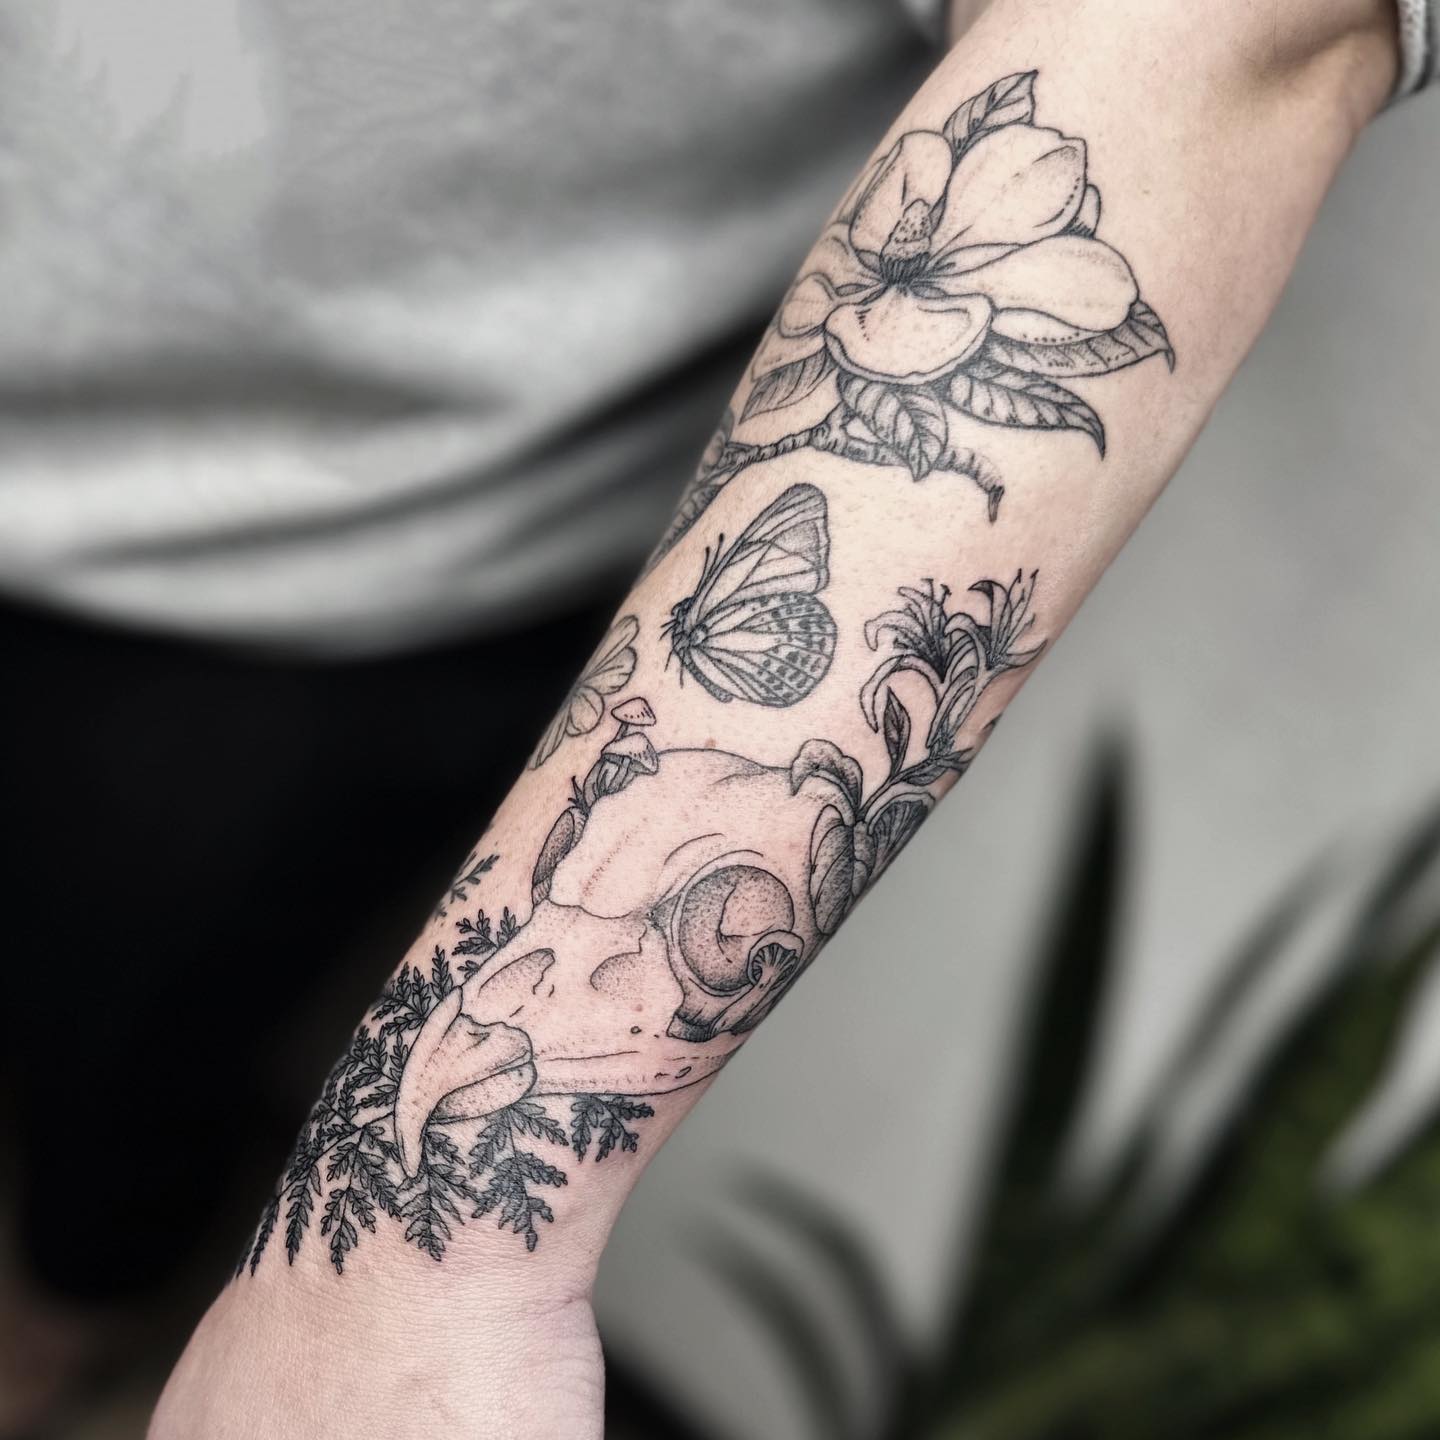 30+ Patchwork Tattoos: Unique and Eye-Catching Design Ideas - 100 Tattoos